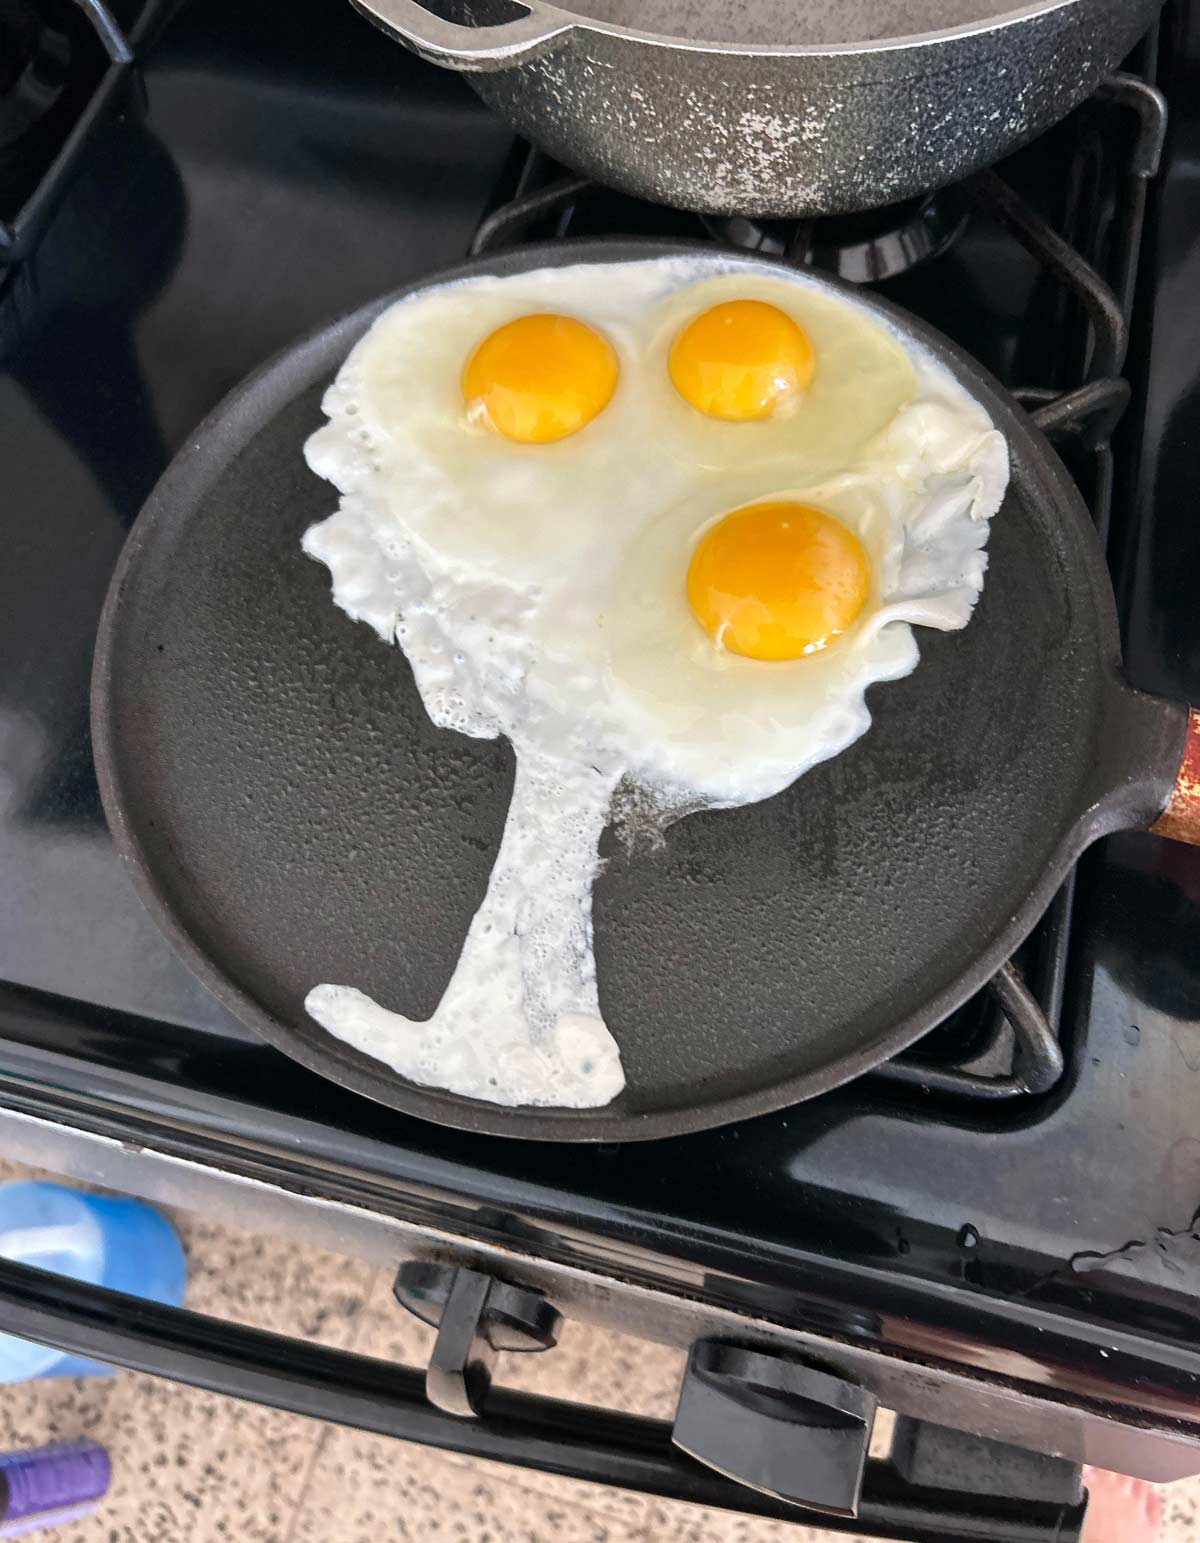 Accidentally made my eggs like this, looks like a tree with oranges